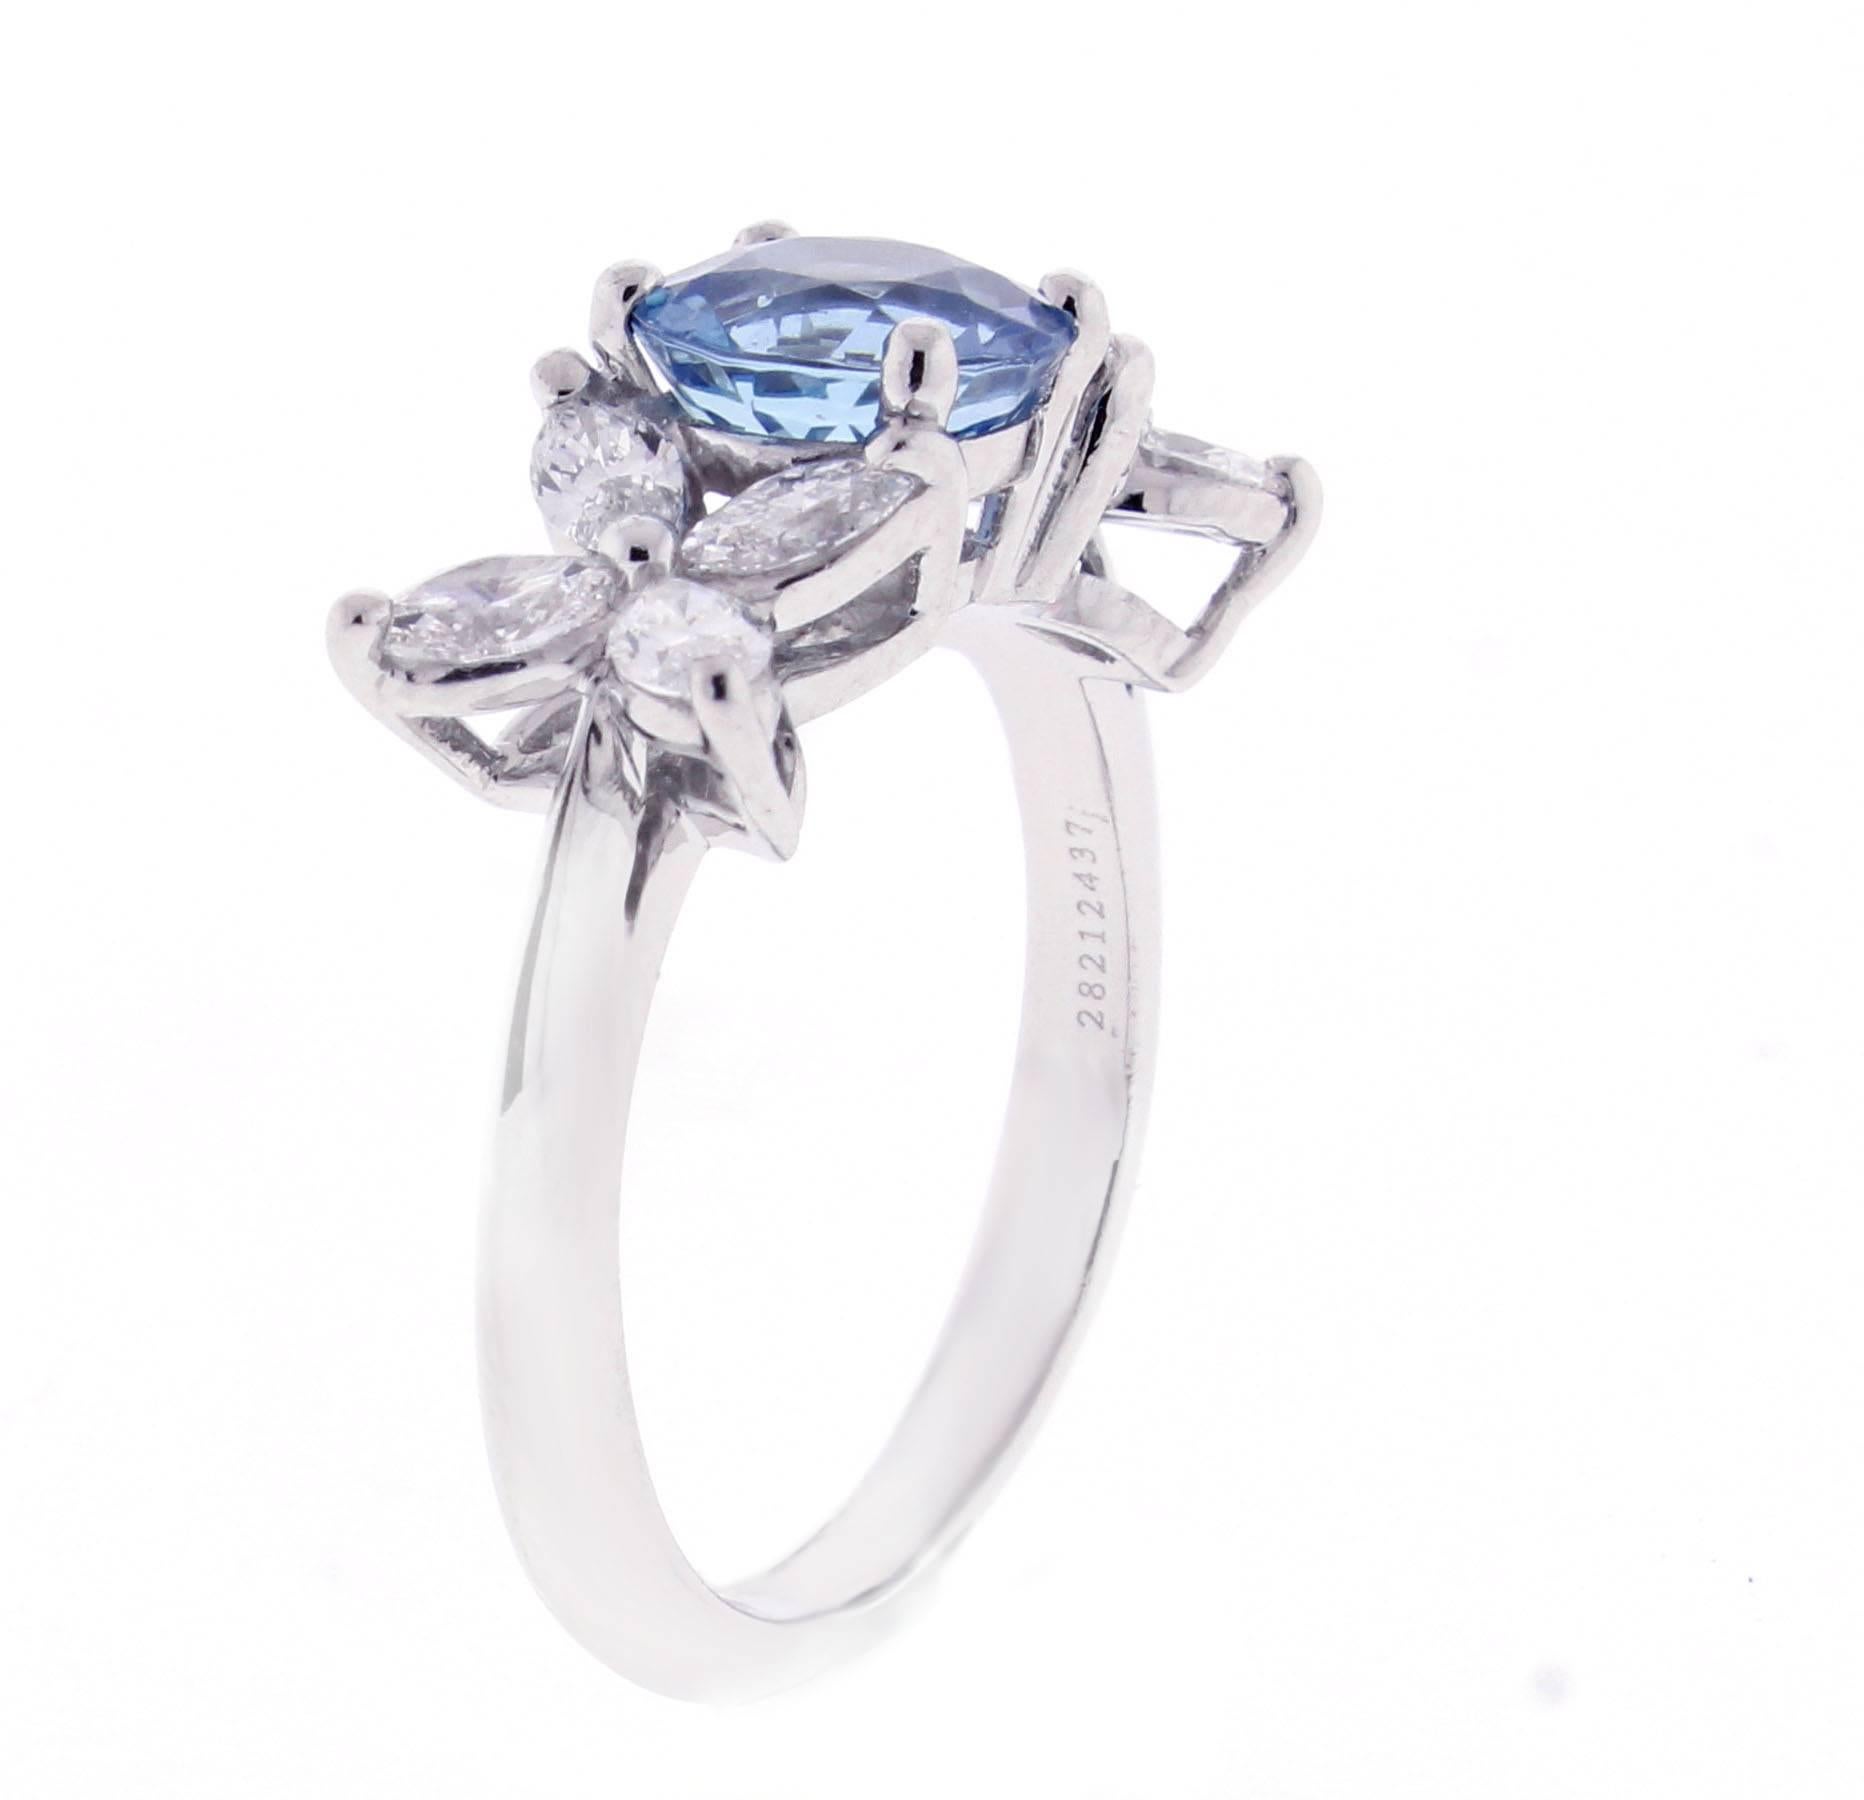 Marquise diamonds blaze like stars that light the night. The Victoria setting by Tiffany & Co.makes the perfect setting for this round  Santa Maria  deep blue Aquamarine. The aquamarine has a 7mm diameter with a calculated weight of 1.20 carat. The